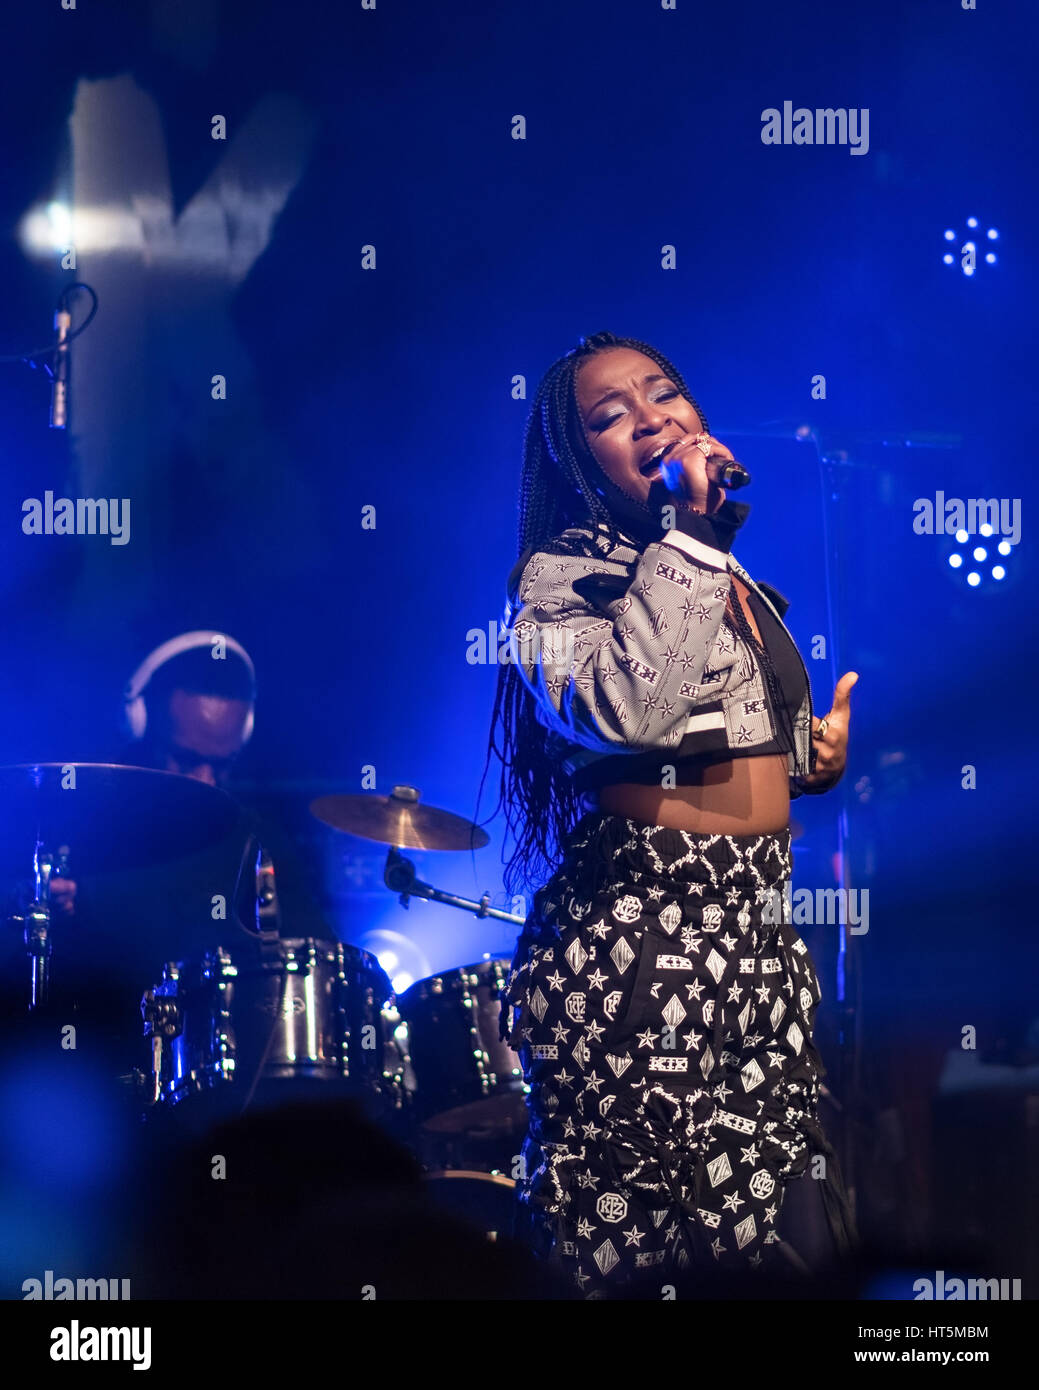 Ray BLK live at the Village Underground, London on 27th February 2017 Stock Photo